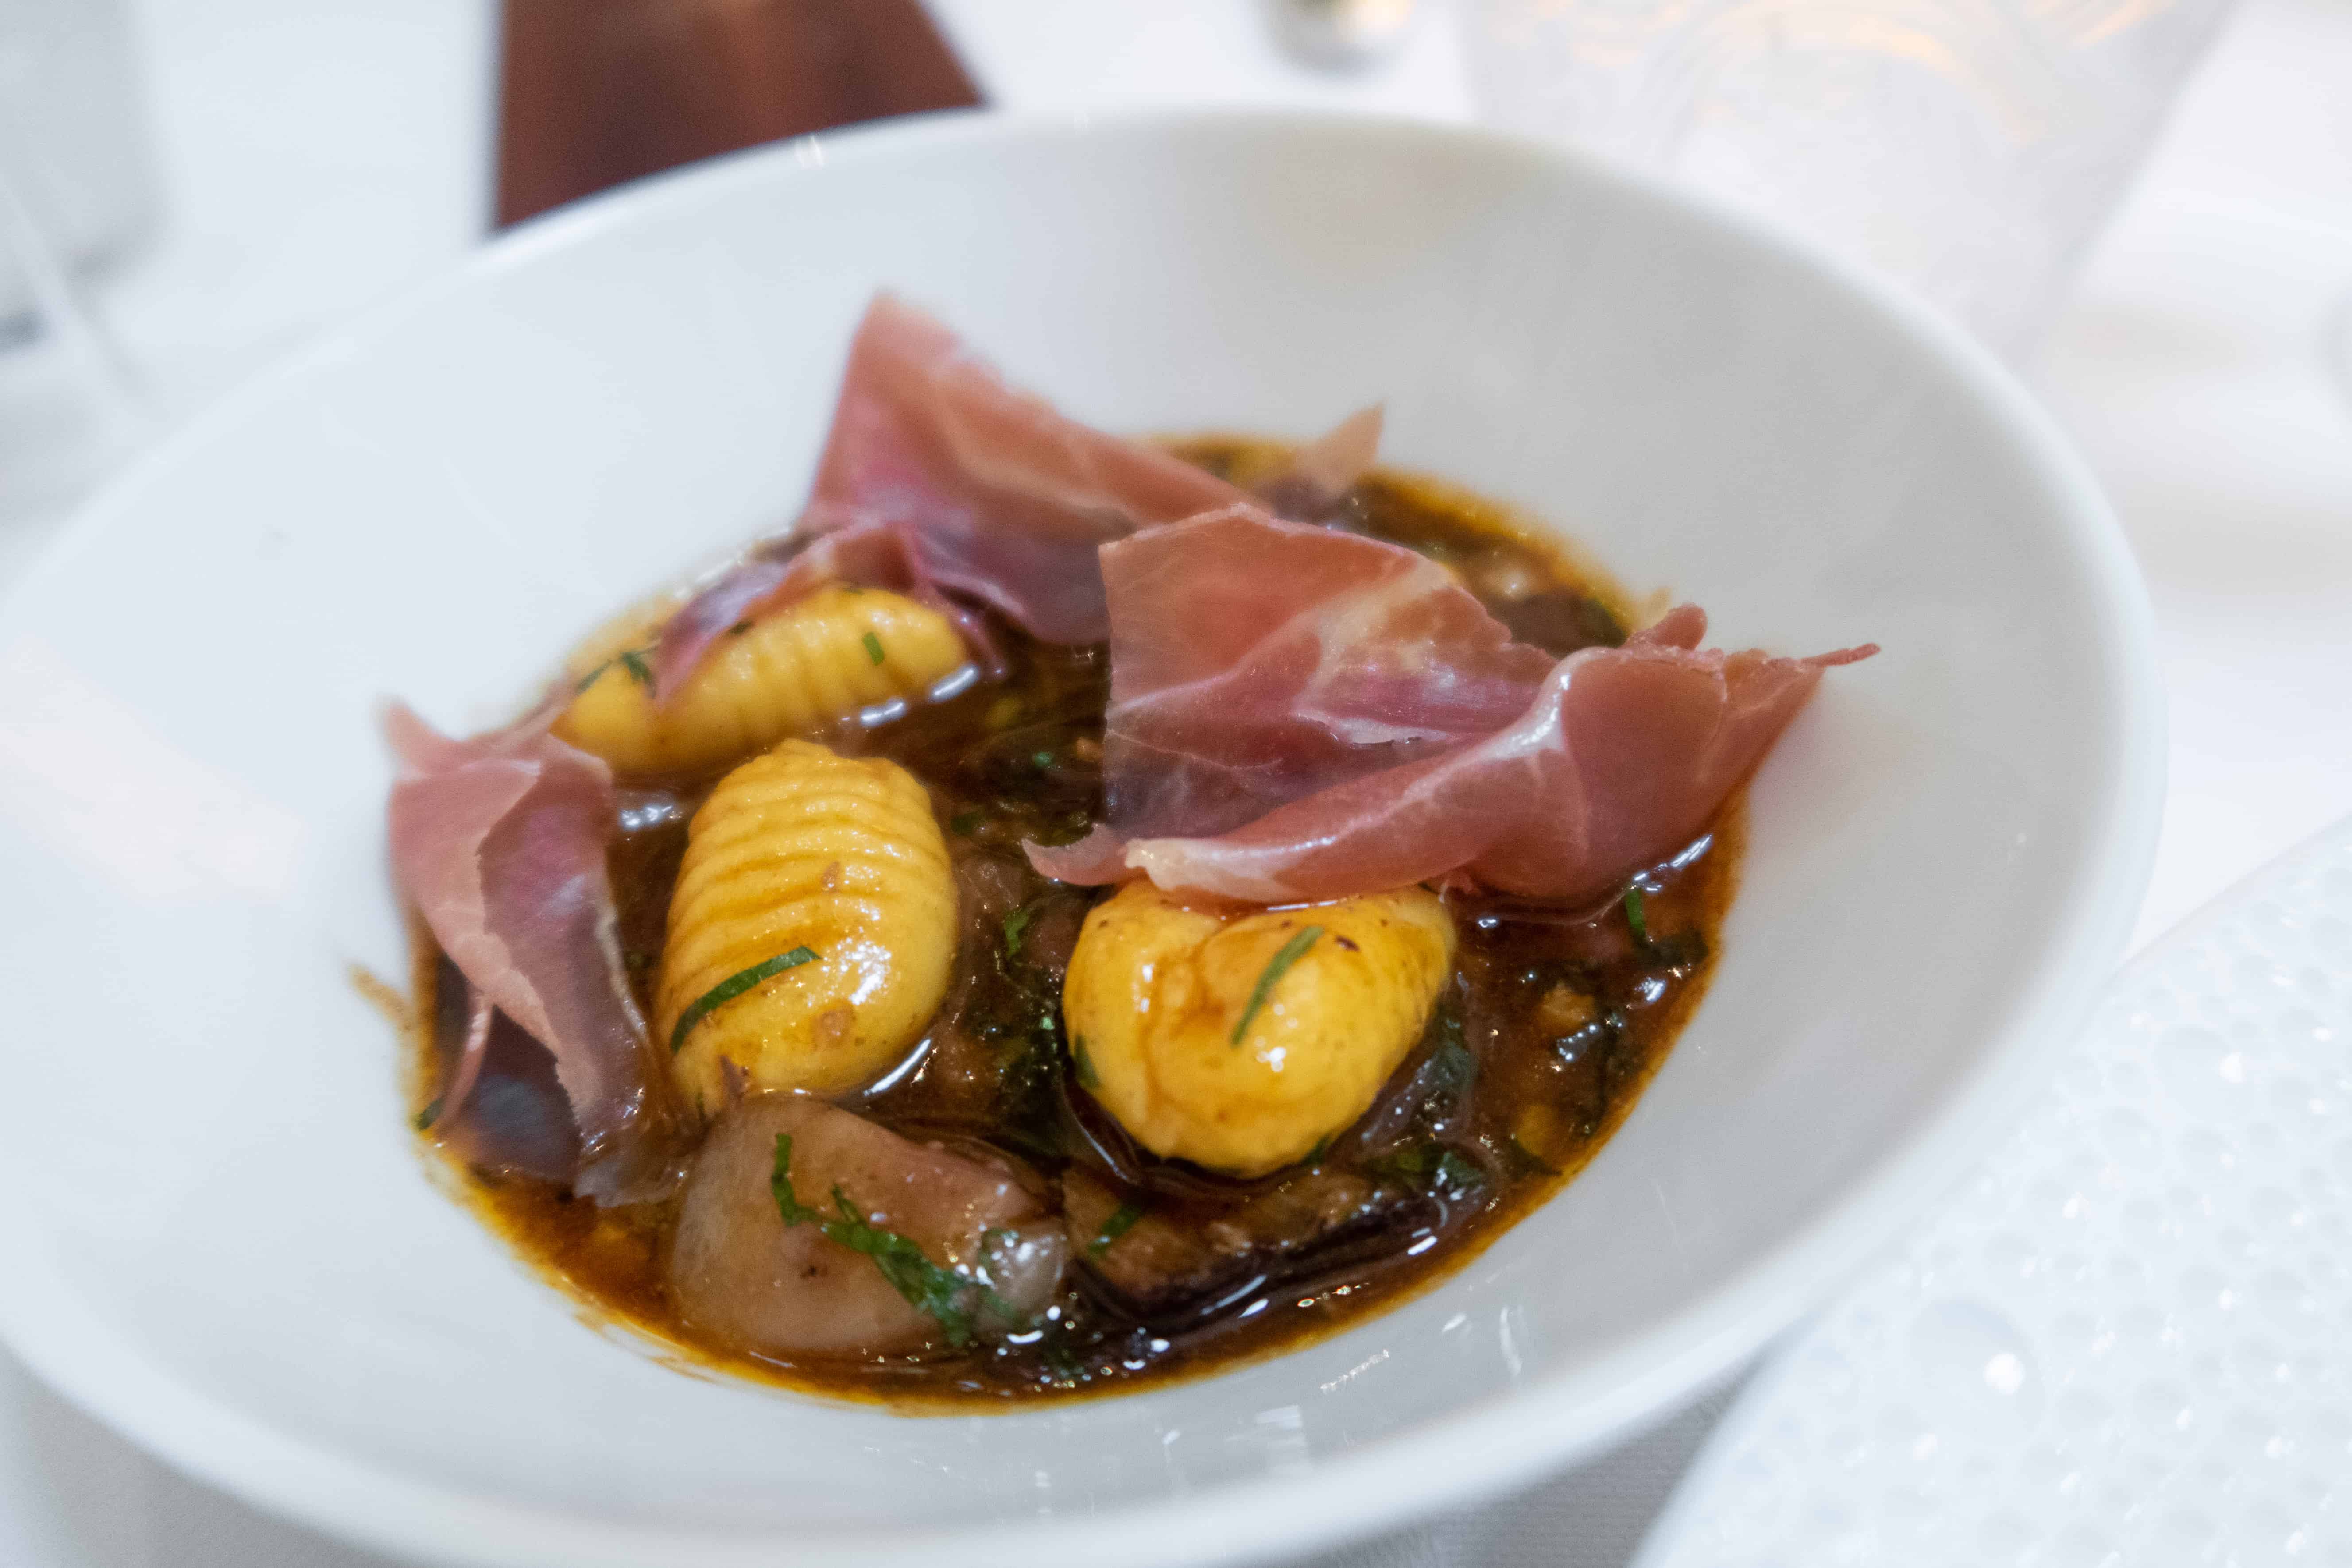 Potato Gnocchi, Osso Bucco, Parma Ham, Taggiasca Olives | Dining at Sketch Lecture Room & Library in London | The Republic of Rose